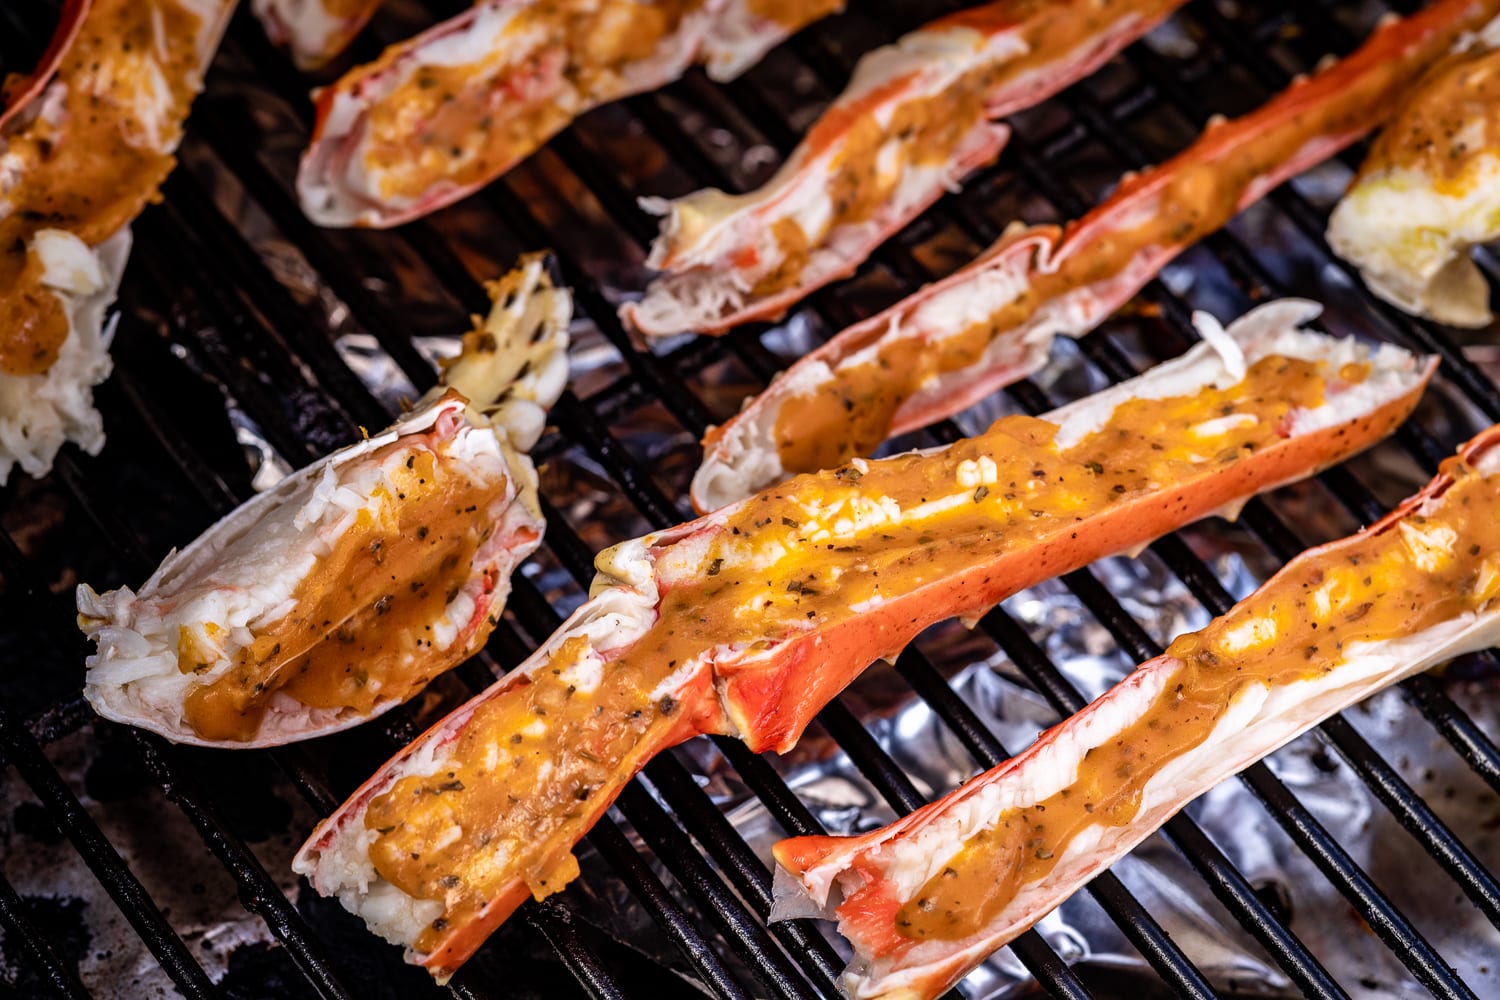 Seasoned king crab legs on the grill.